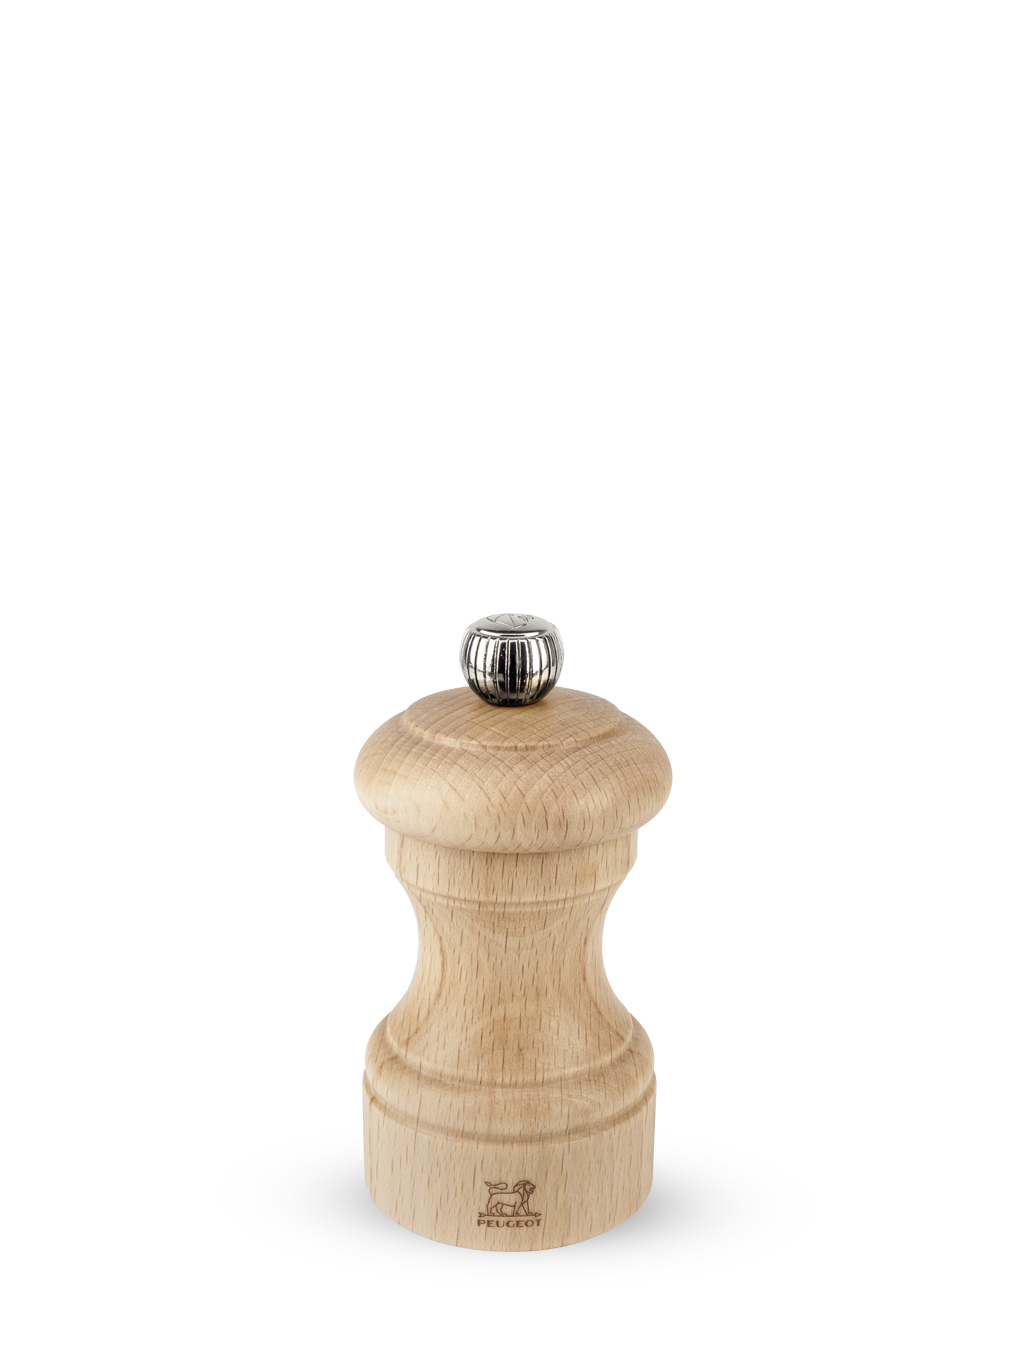 Peugeot Bistro Pepper Mill in natural wood, 10 cm